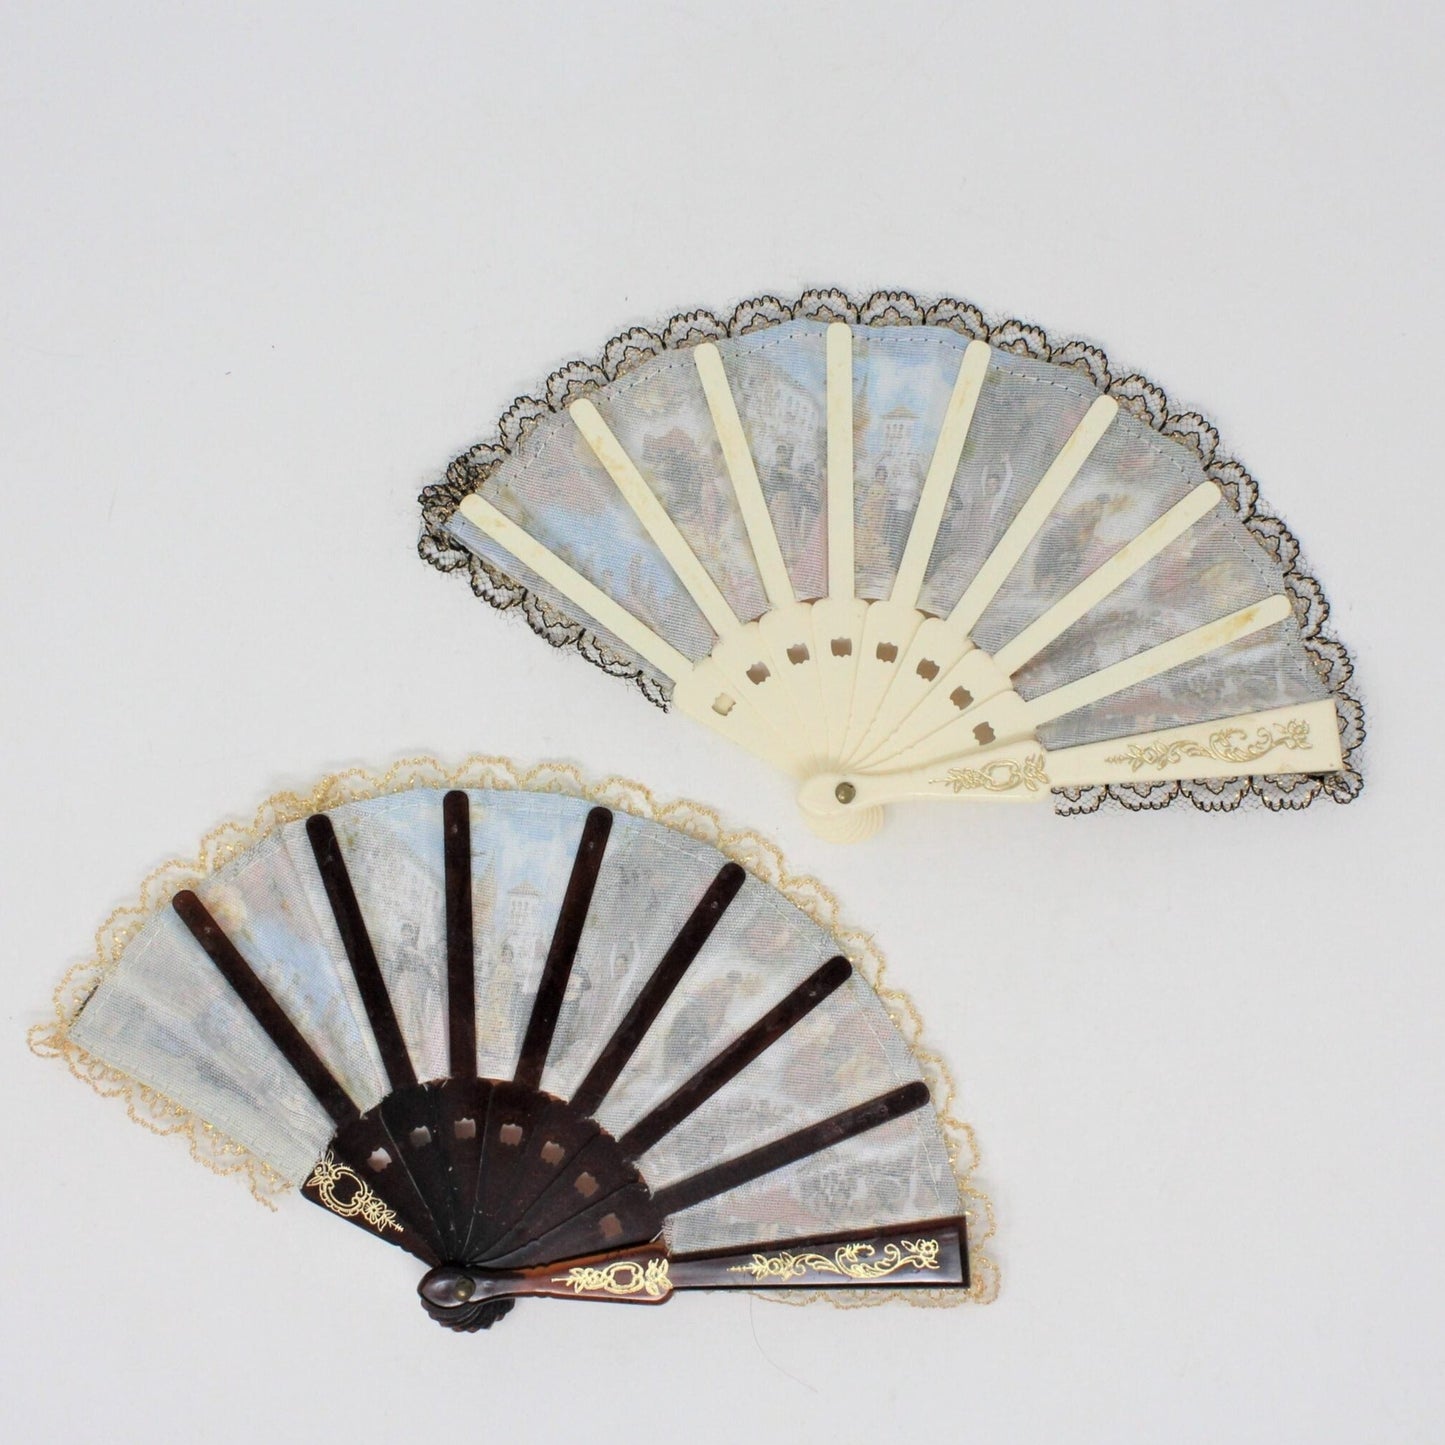 Hand Fan, Spanish Style, Flamenco Dancers / Bull Fighters, Printed Cloth, Small, Set of 2, Vintage